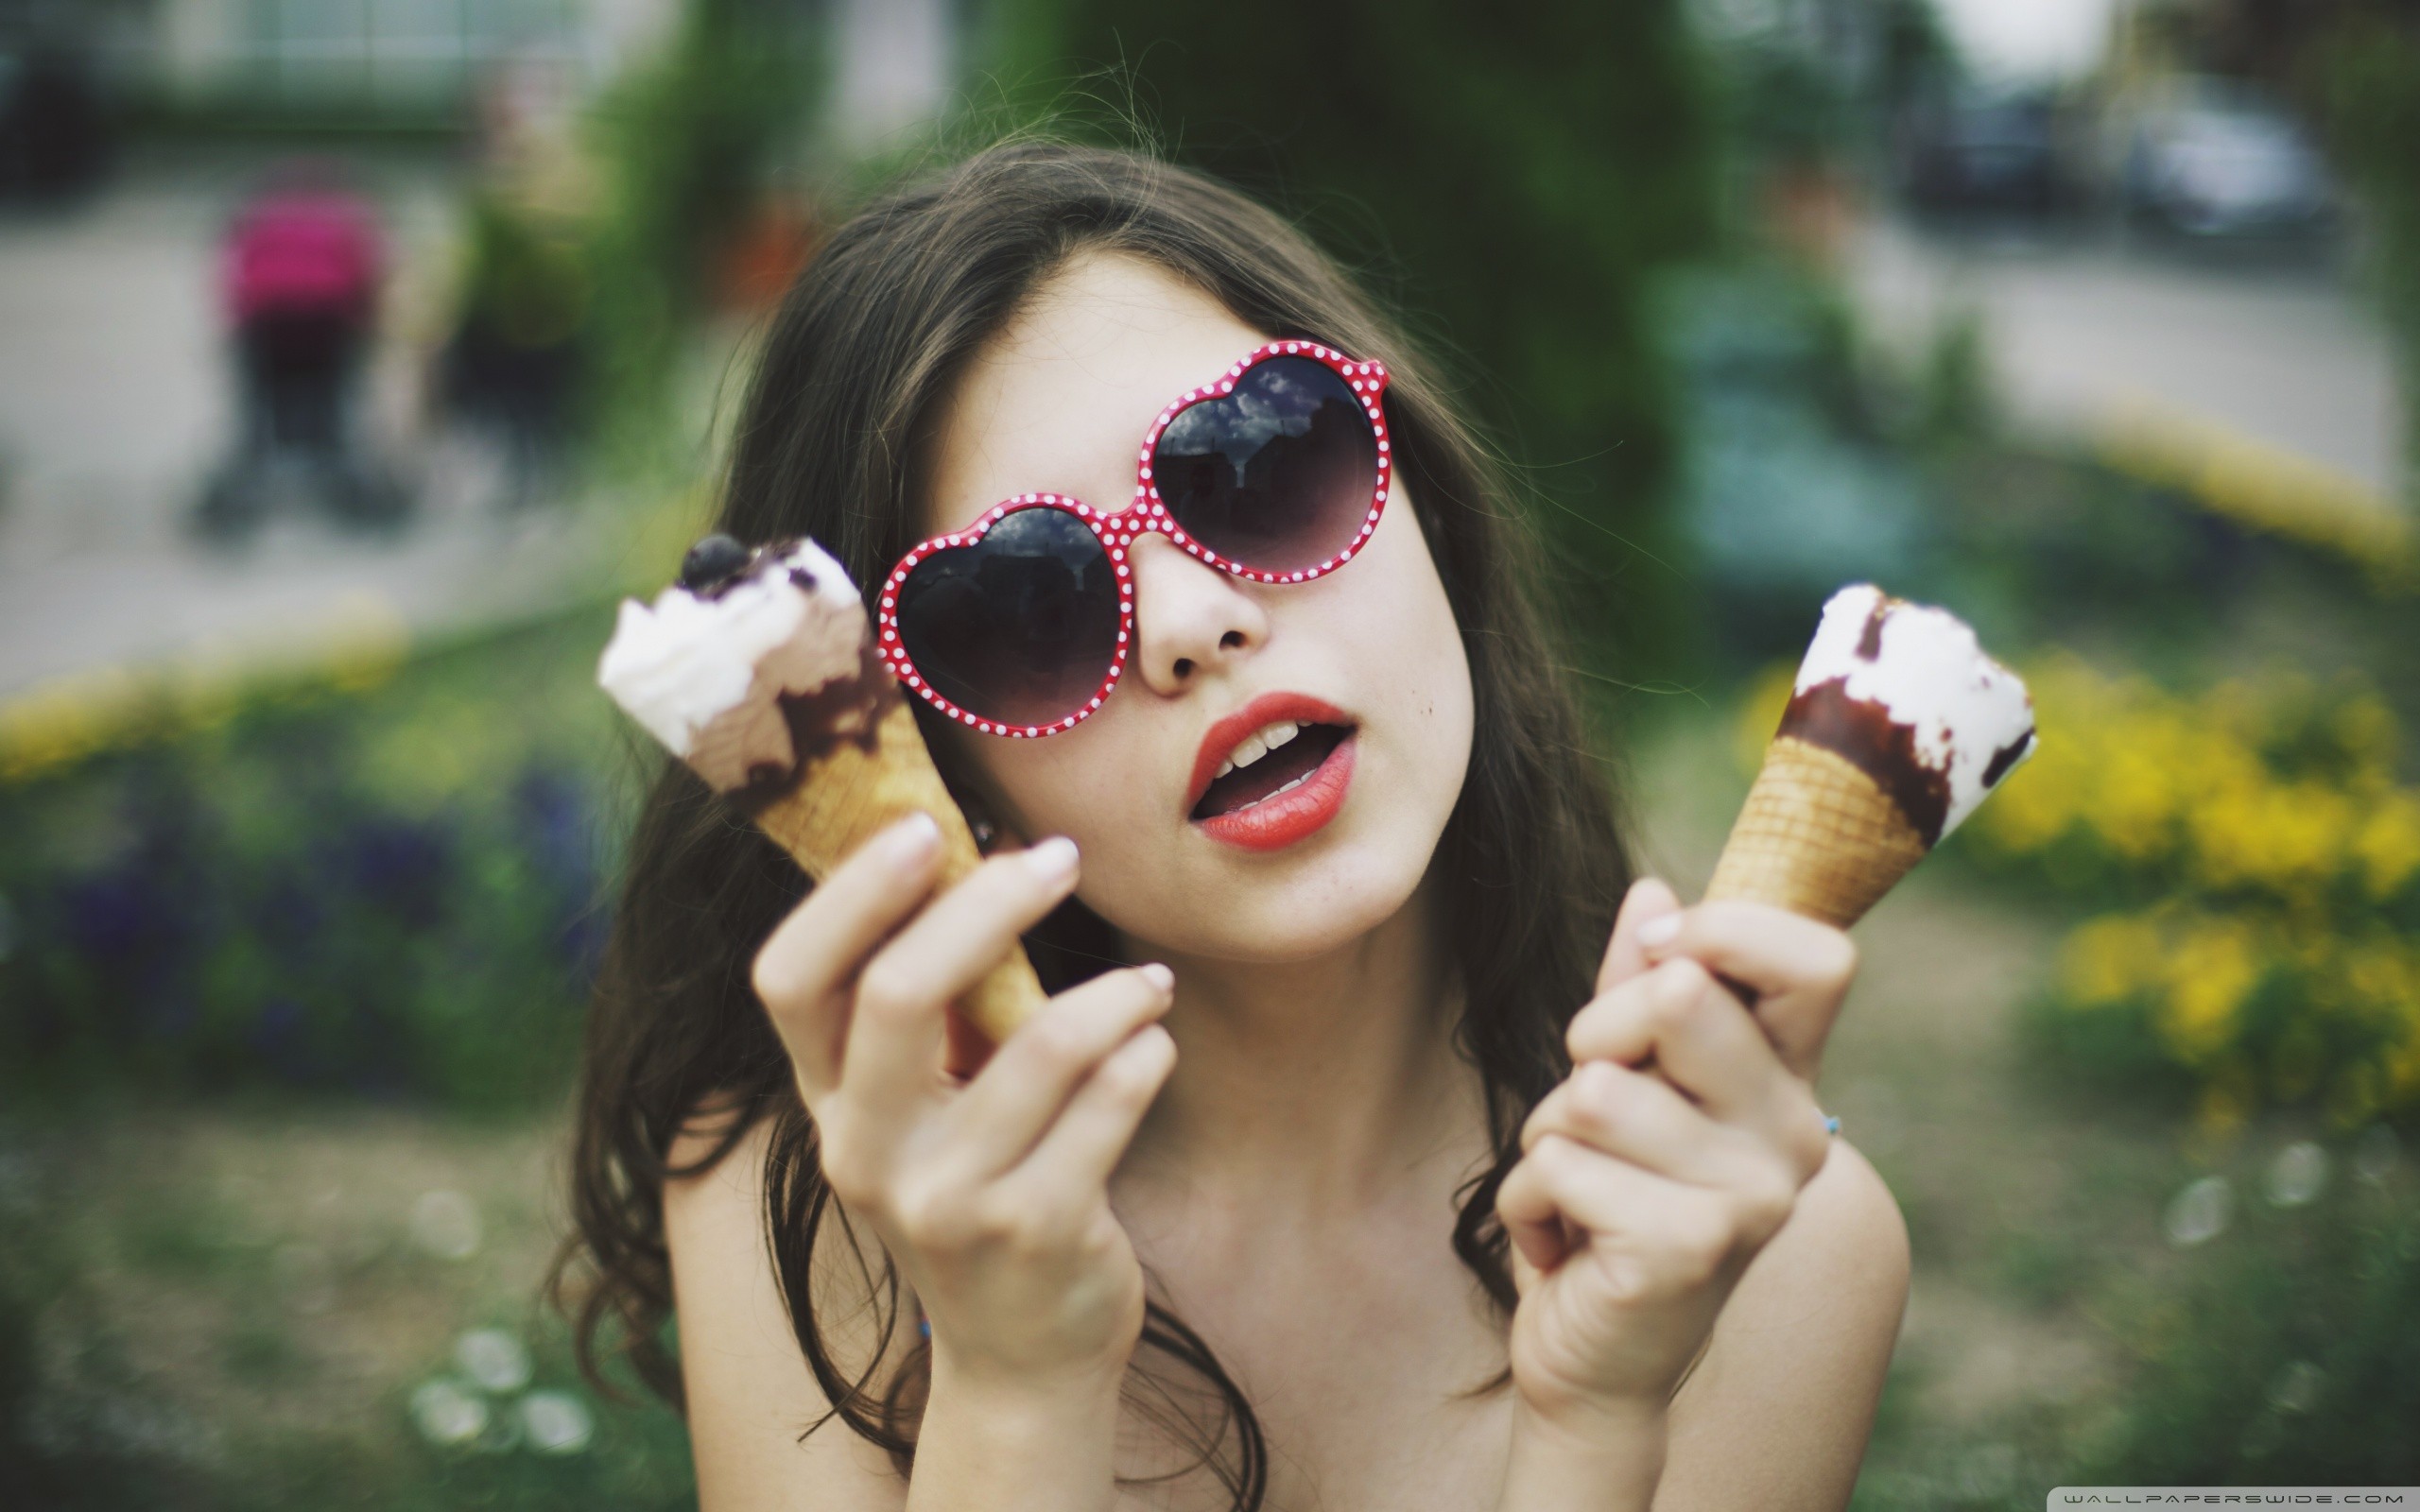 People 2560x1600 brunette women ice cream red lipstick model women with glasses food sweets women with shades sunglasses open mouth urban women outdoors outdoors heart sunglasses closeup watermarked